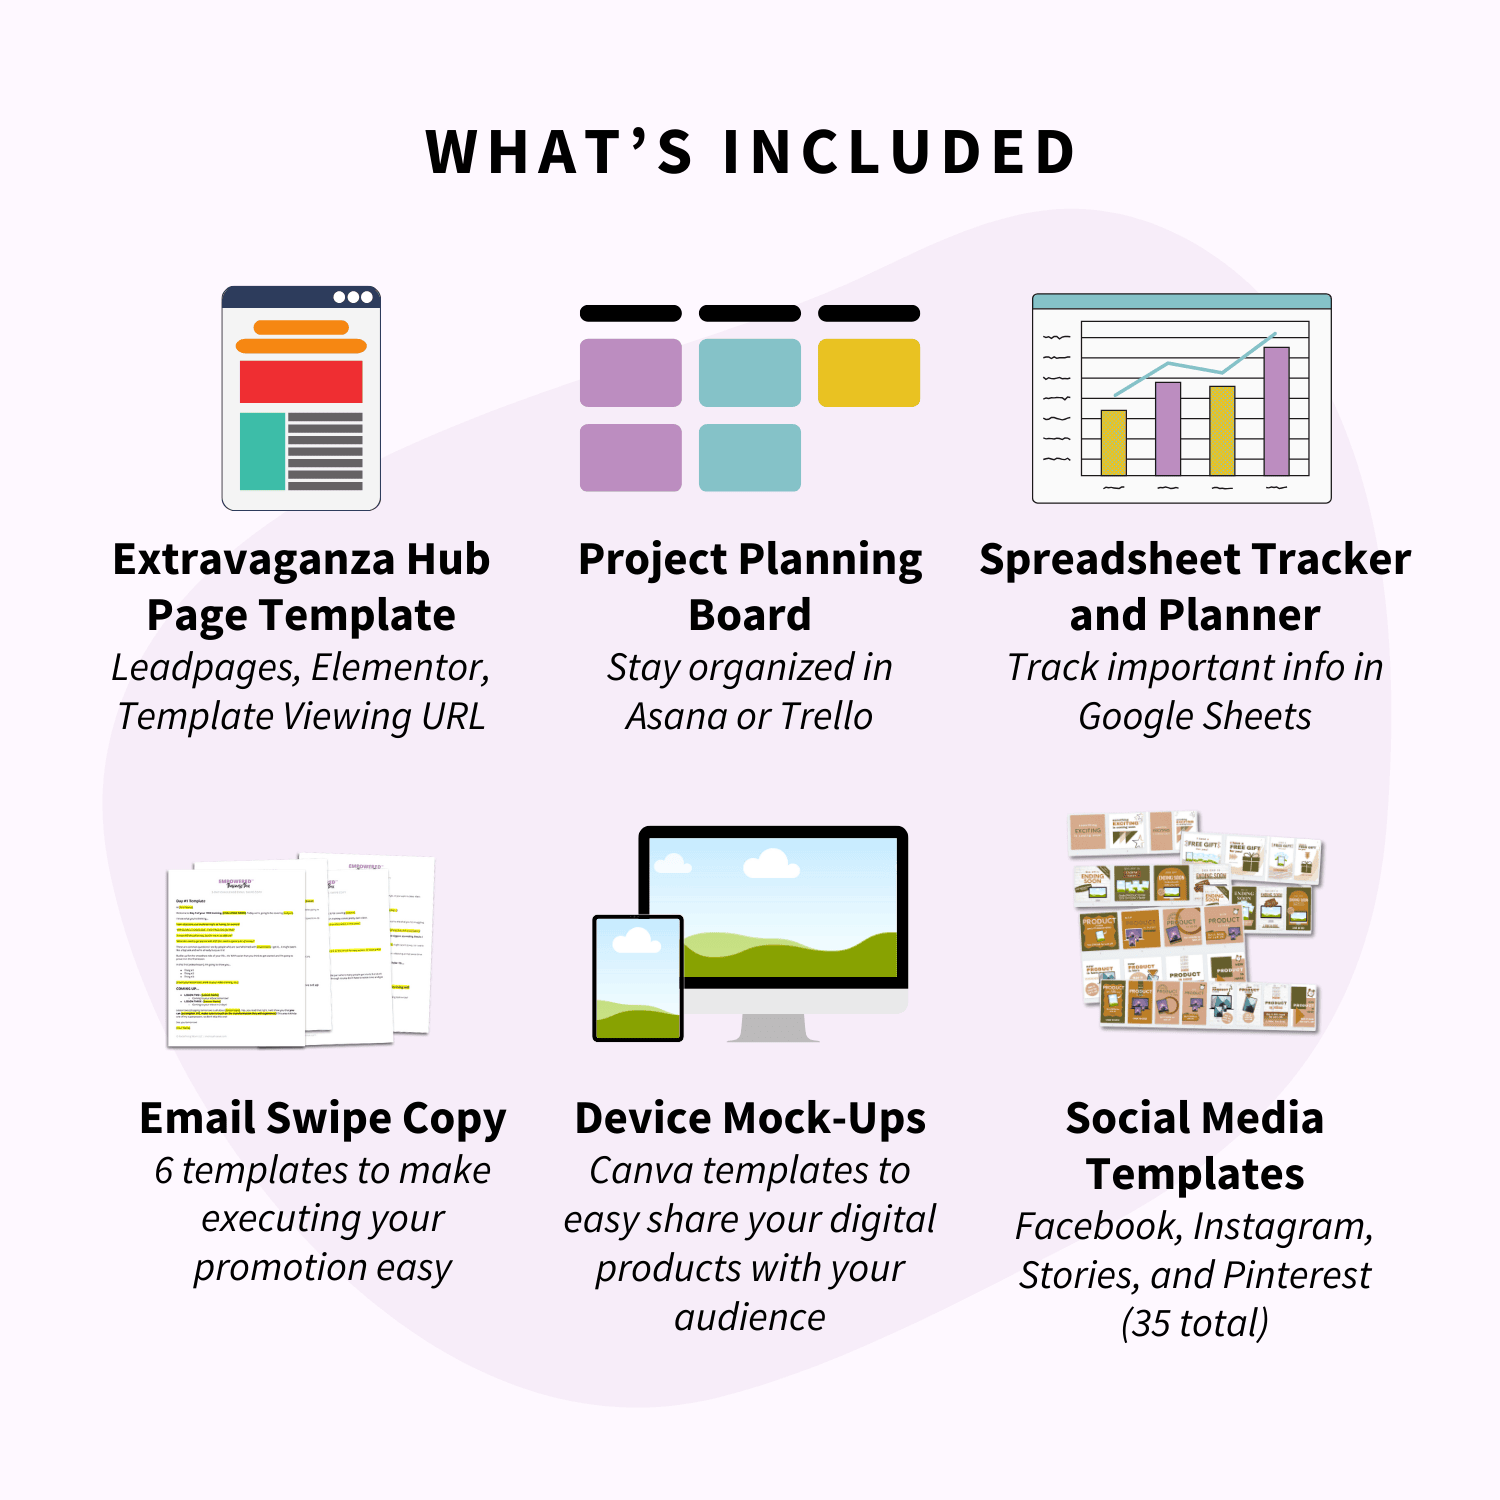 what's included in the Digital Product Extravaganza Toolbox